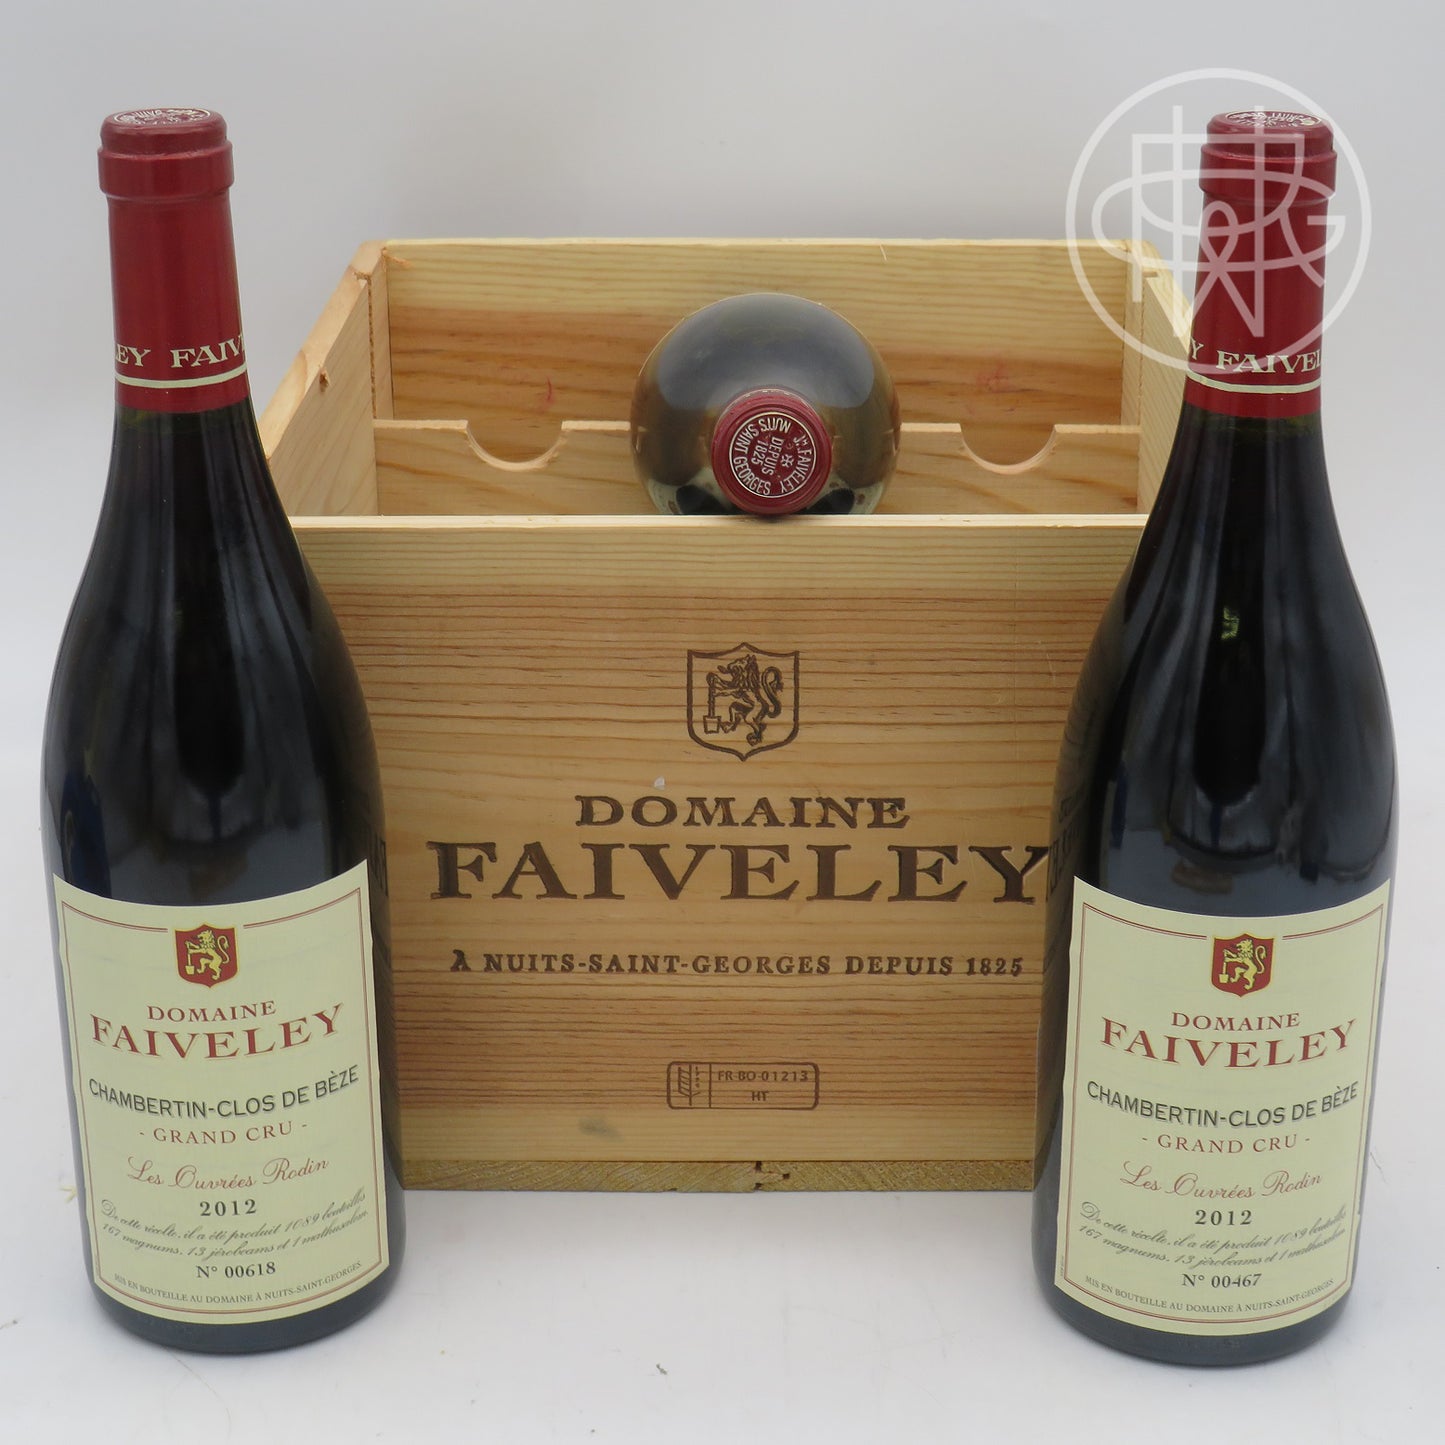 Faiveley Les Ouvrees Rodin 2012 6-Pack OWC 750mL